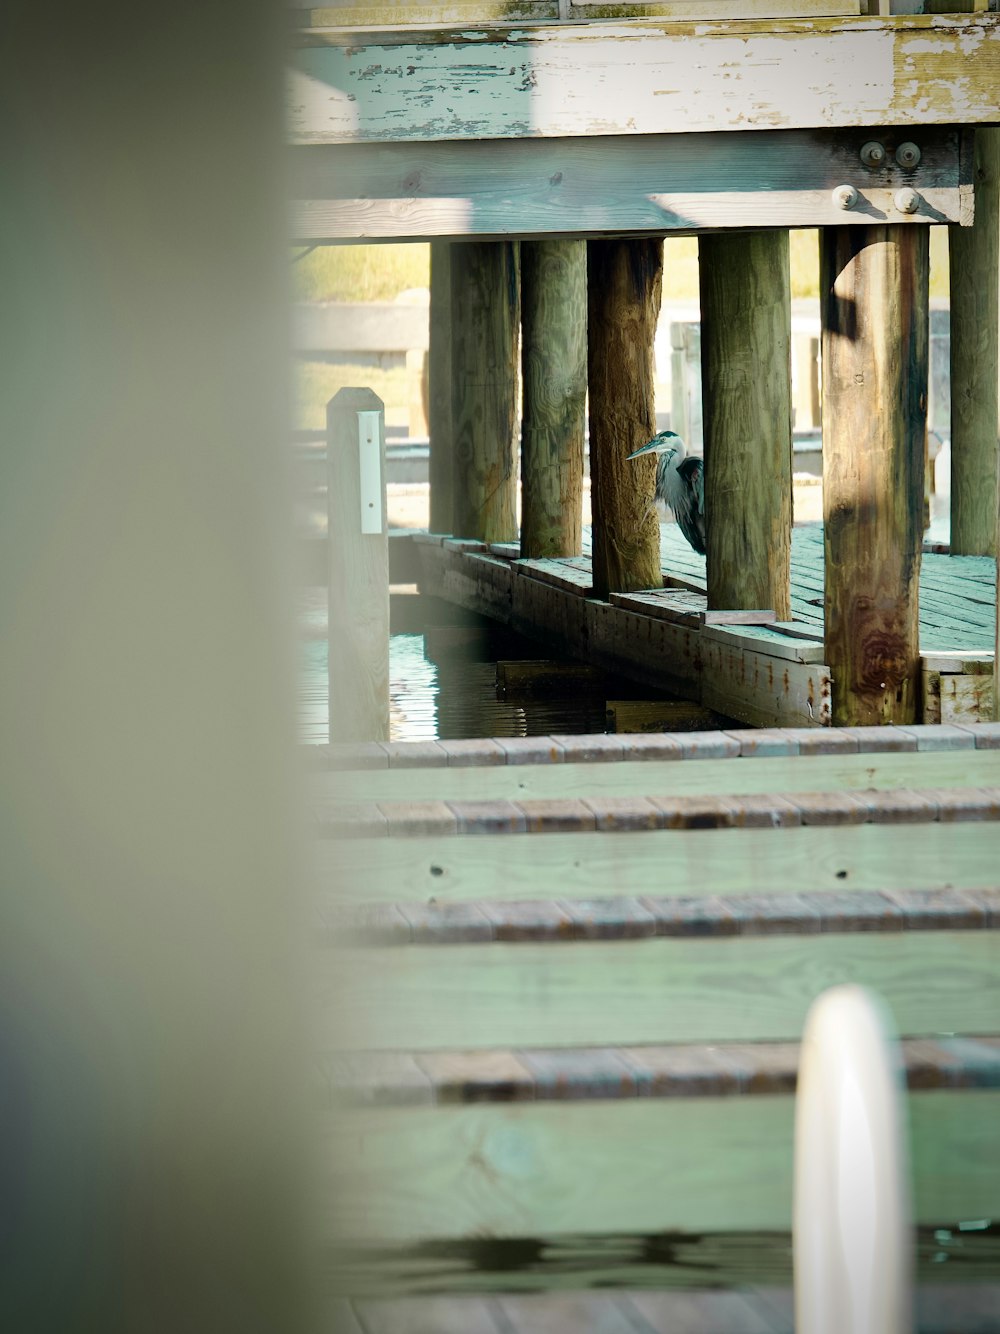 a bird is sitting on a wooden dock